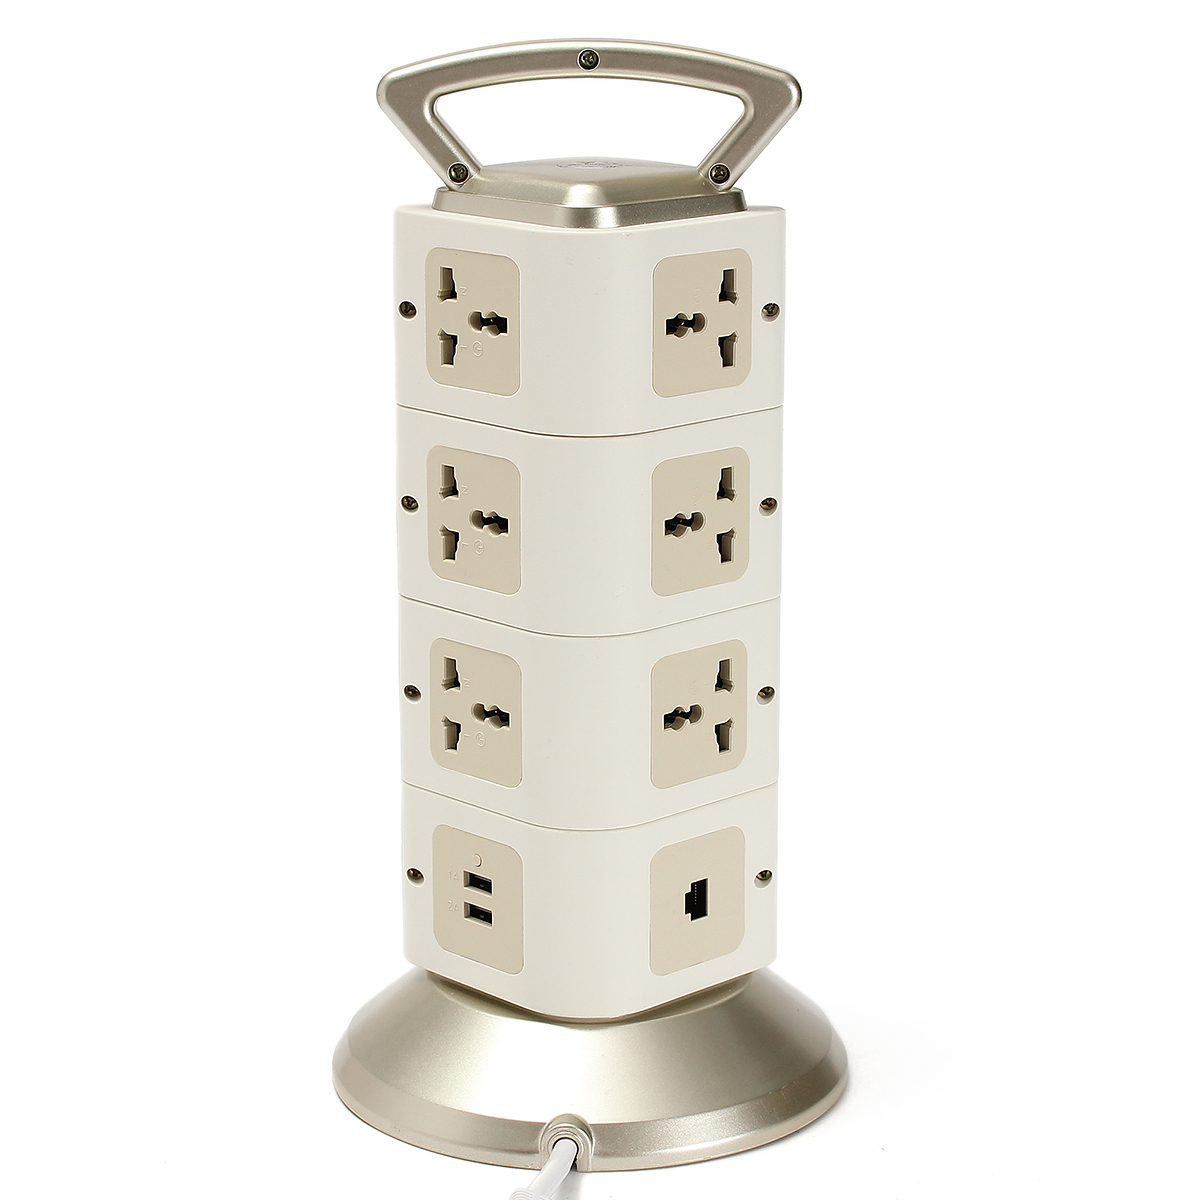 Find High precision Nickel plated Phosphor Bronze Material Portable USB WIFI Universal Outlet Port for Sale on Gipsybee.com with cryptocurrencies